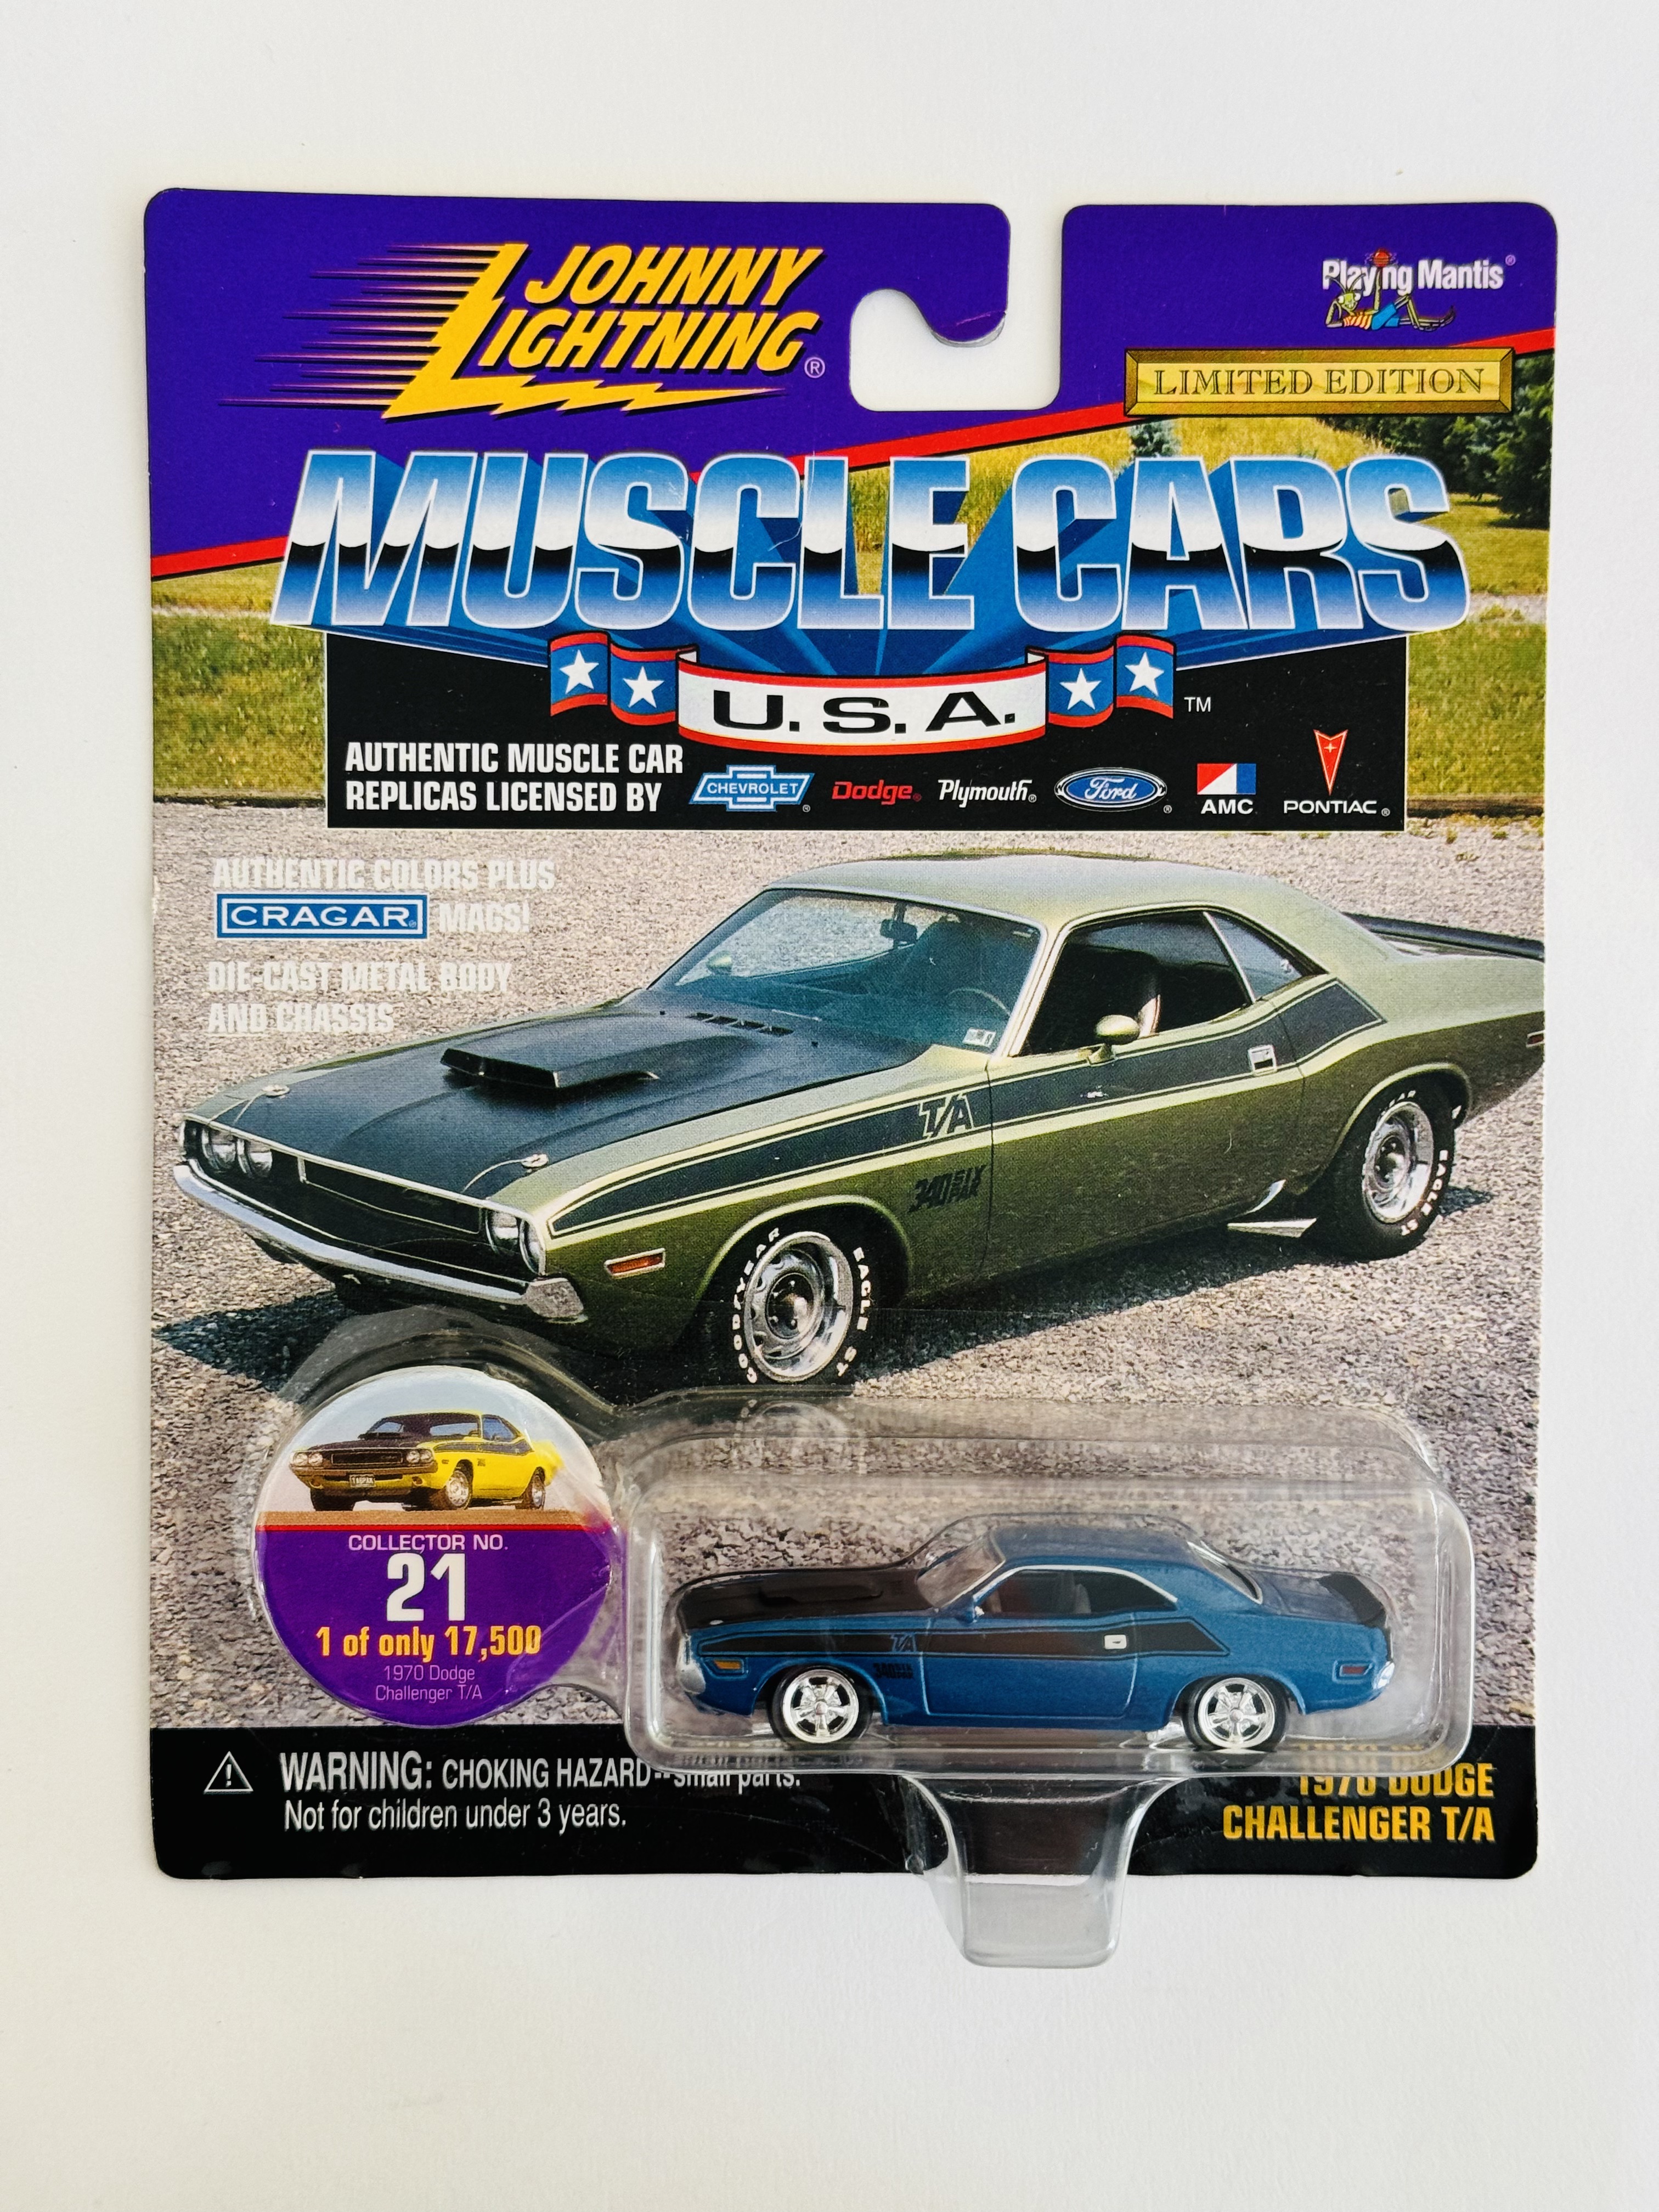 Johnny Lightning Muscle Cars U.S.A. 1970 Dodge Challenger T/A